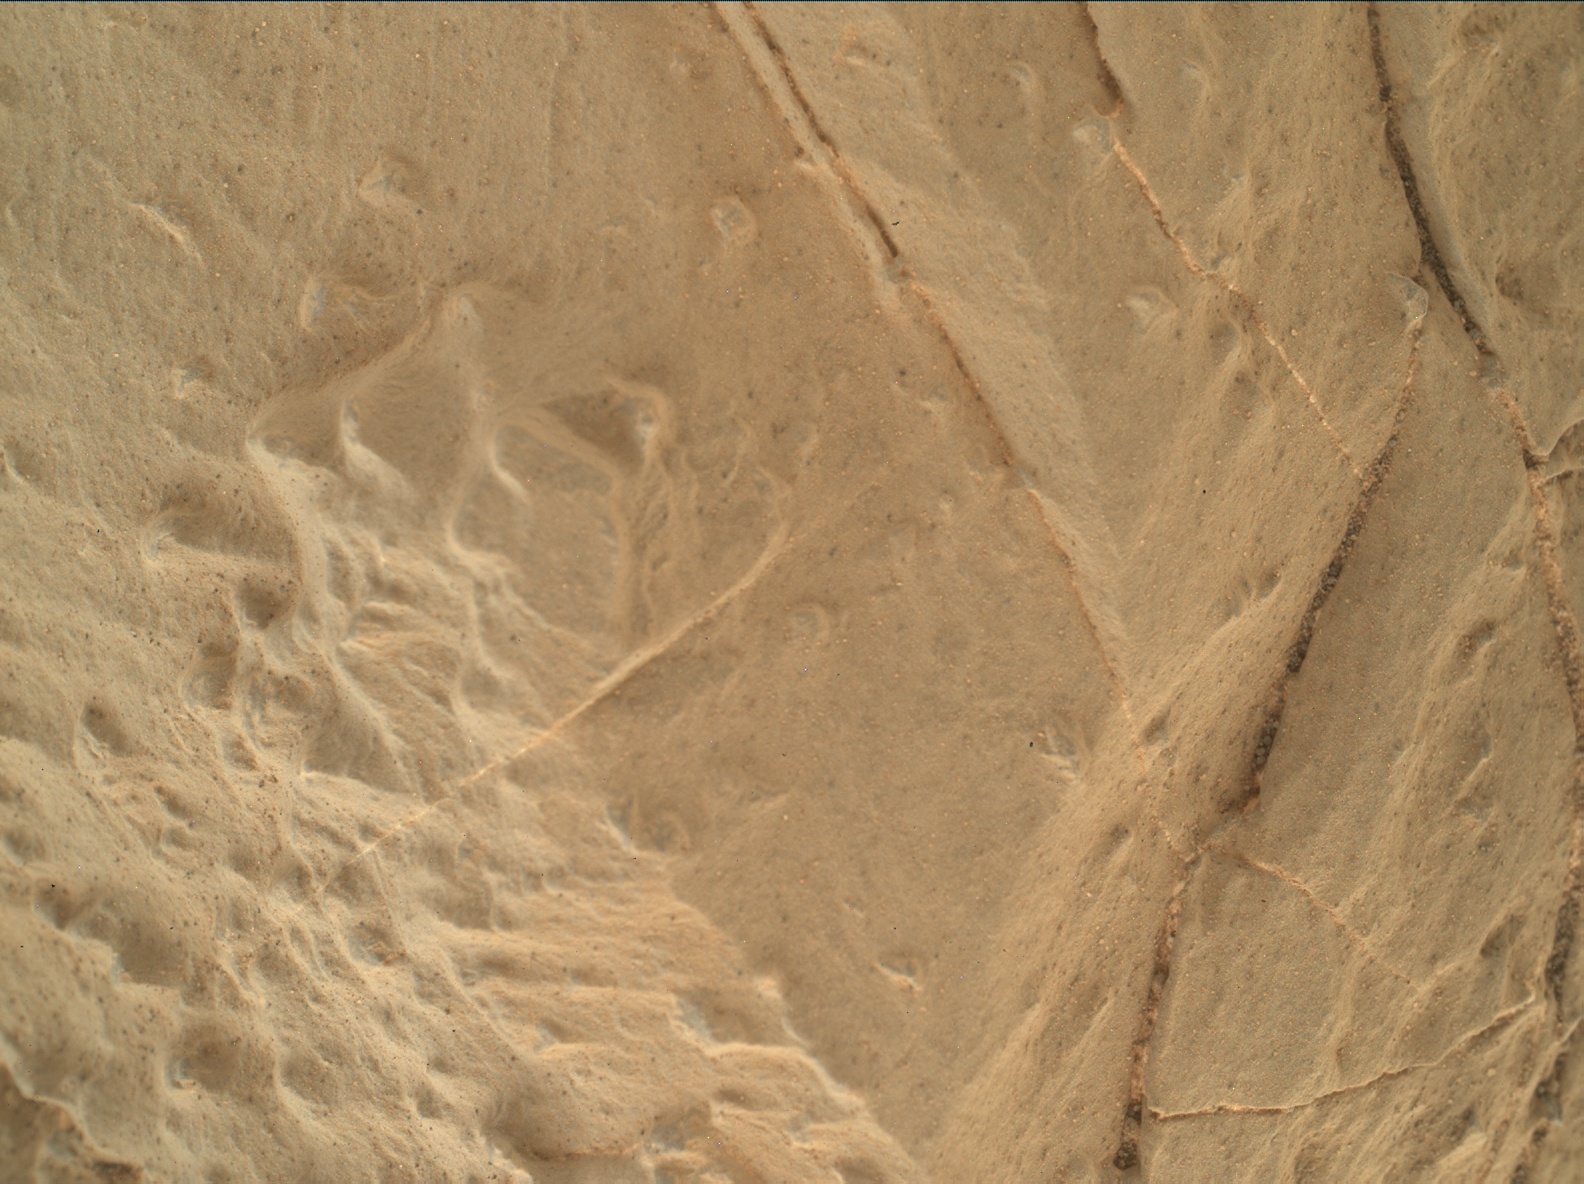 Nasa's Mars rover Curiosity acquired this image using its Mars Hand Lens Imager (MAHLI) on Sol 1922